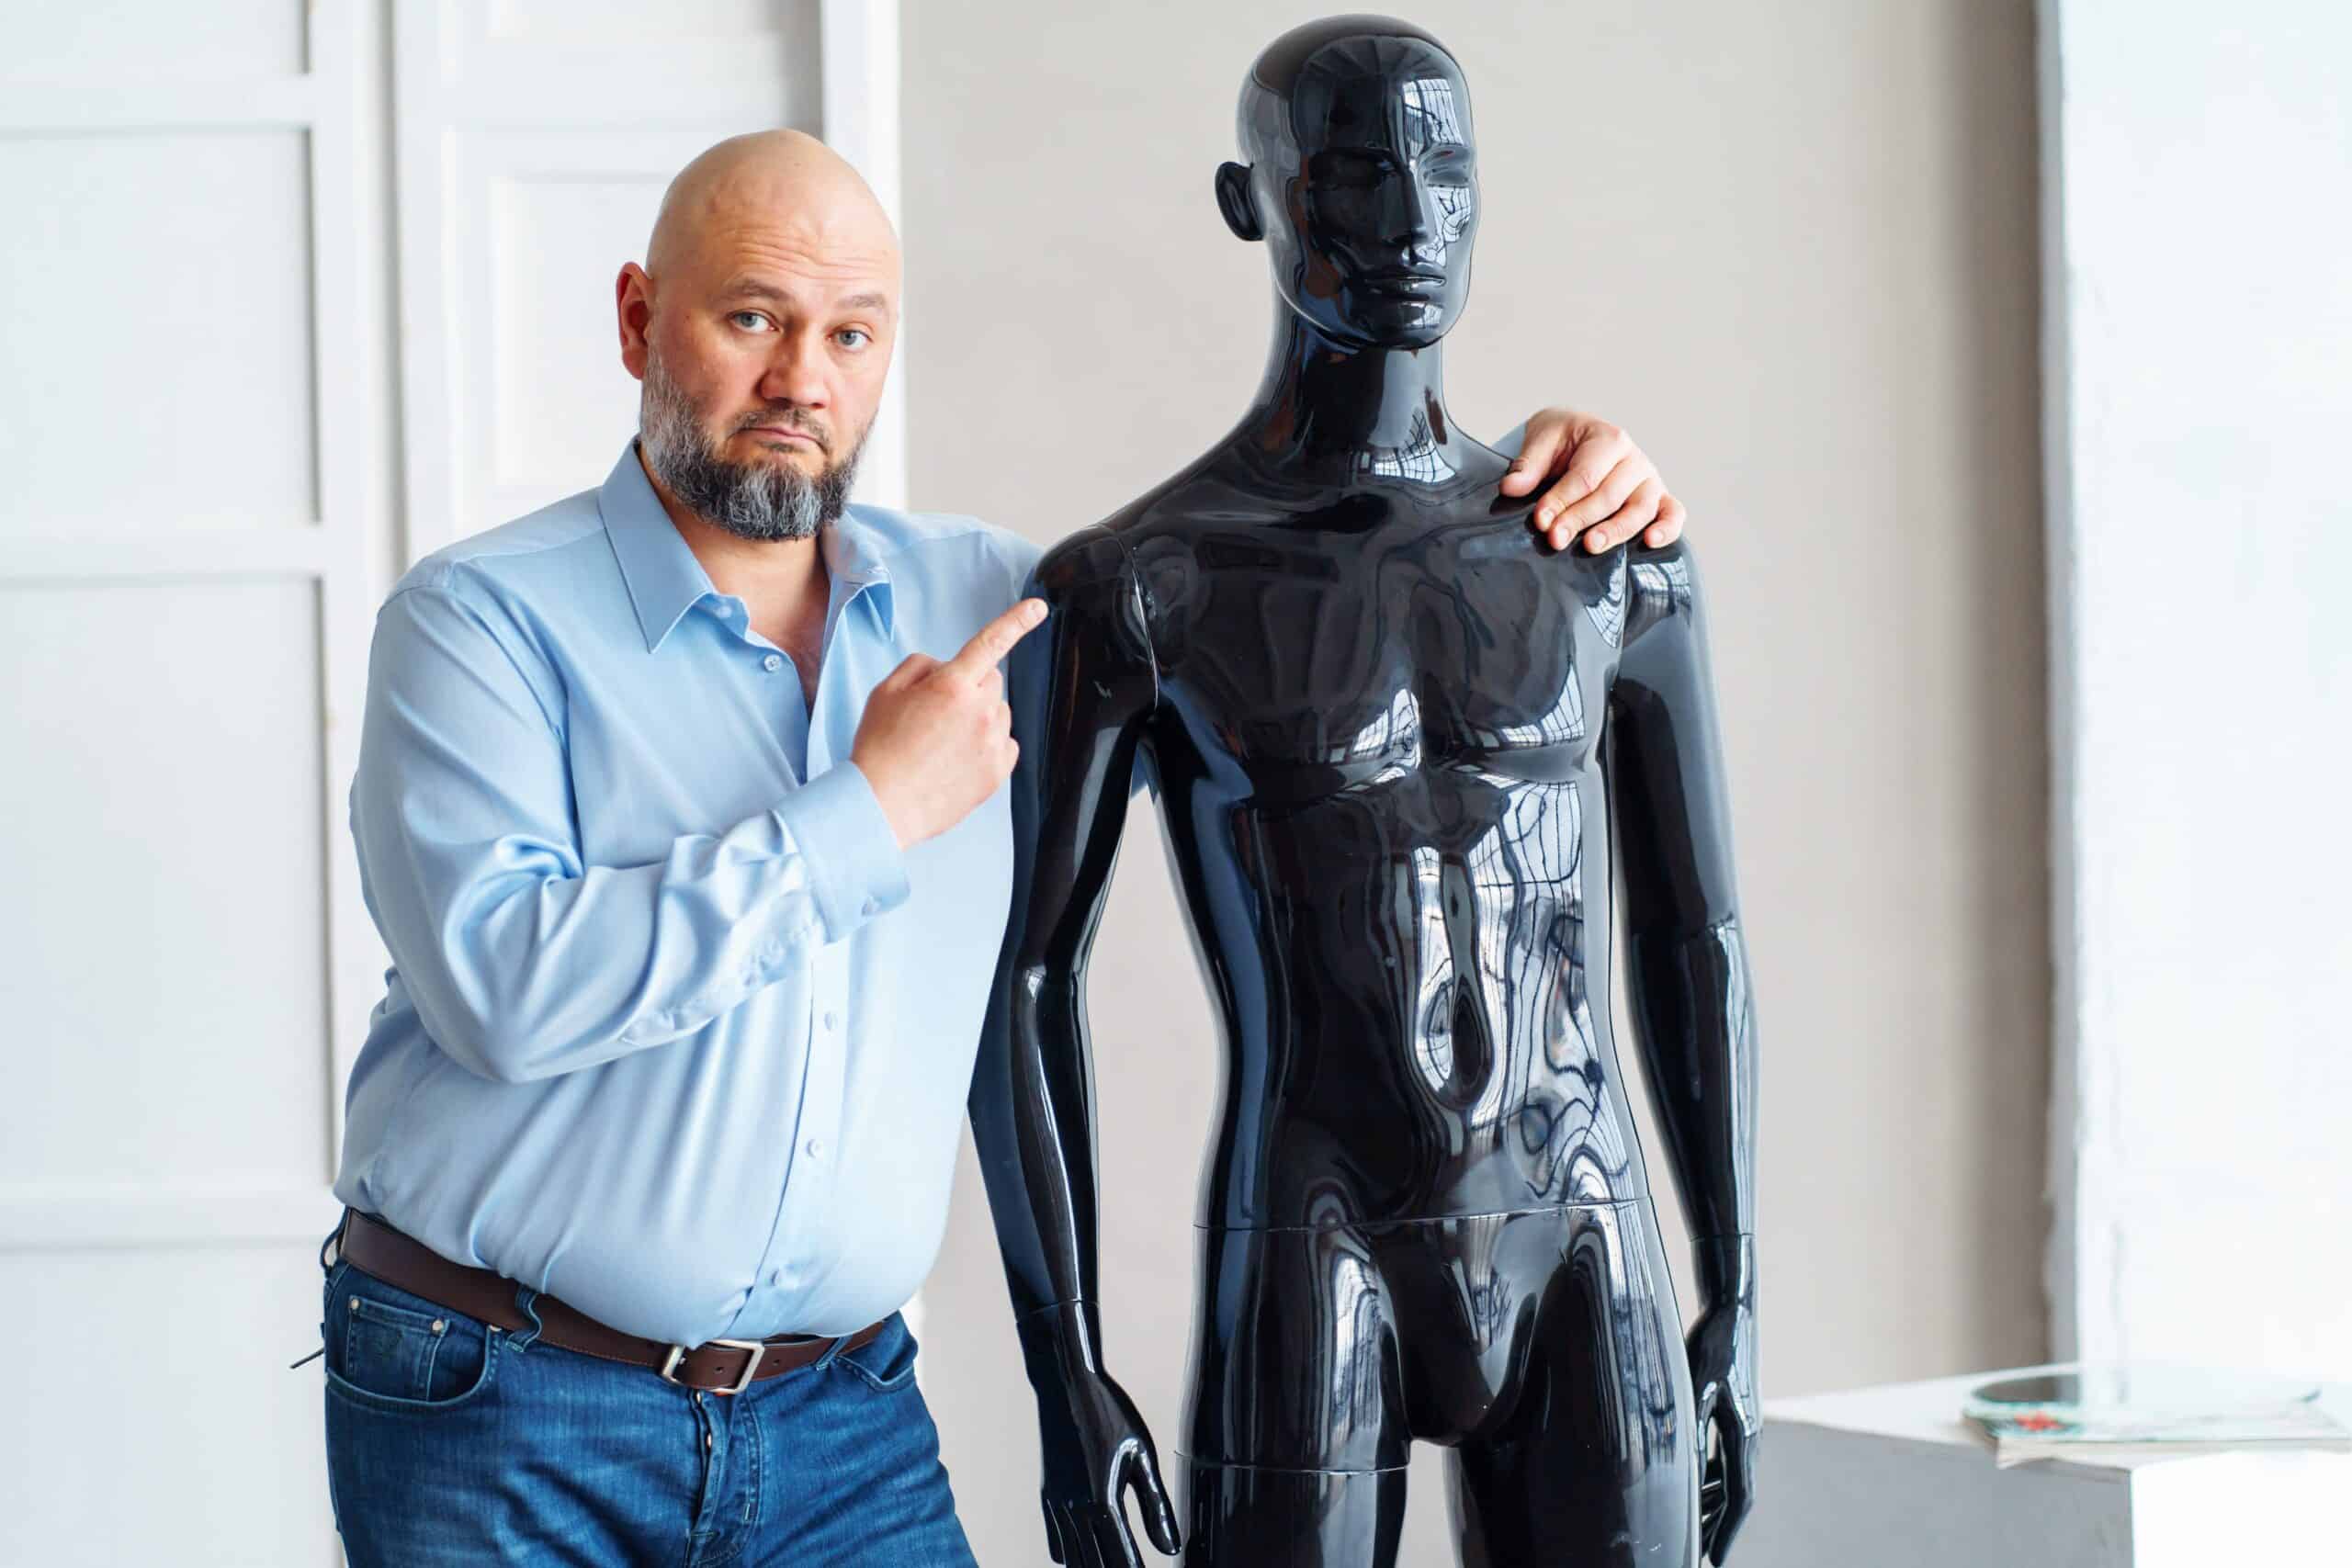 Bald man standing next to a plastic model. Bald men are good candidates for artificial hair transplants